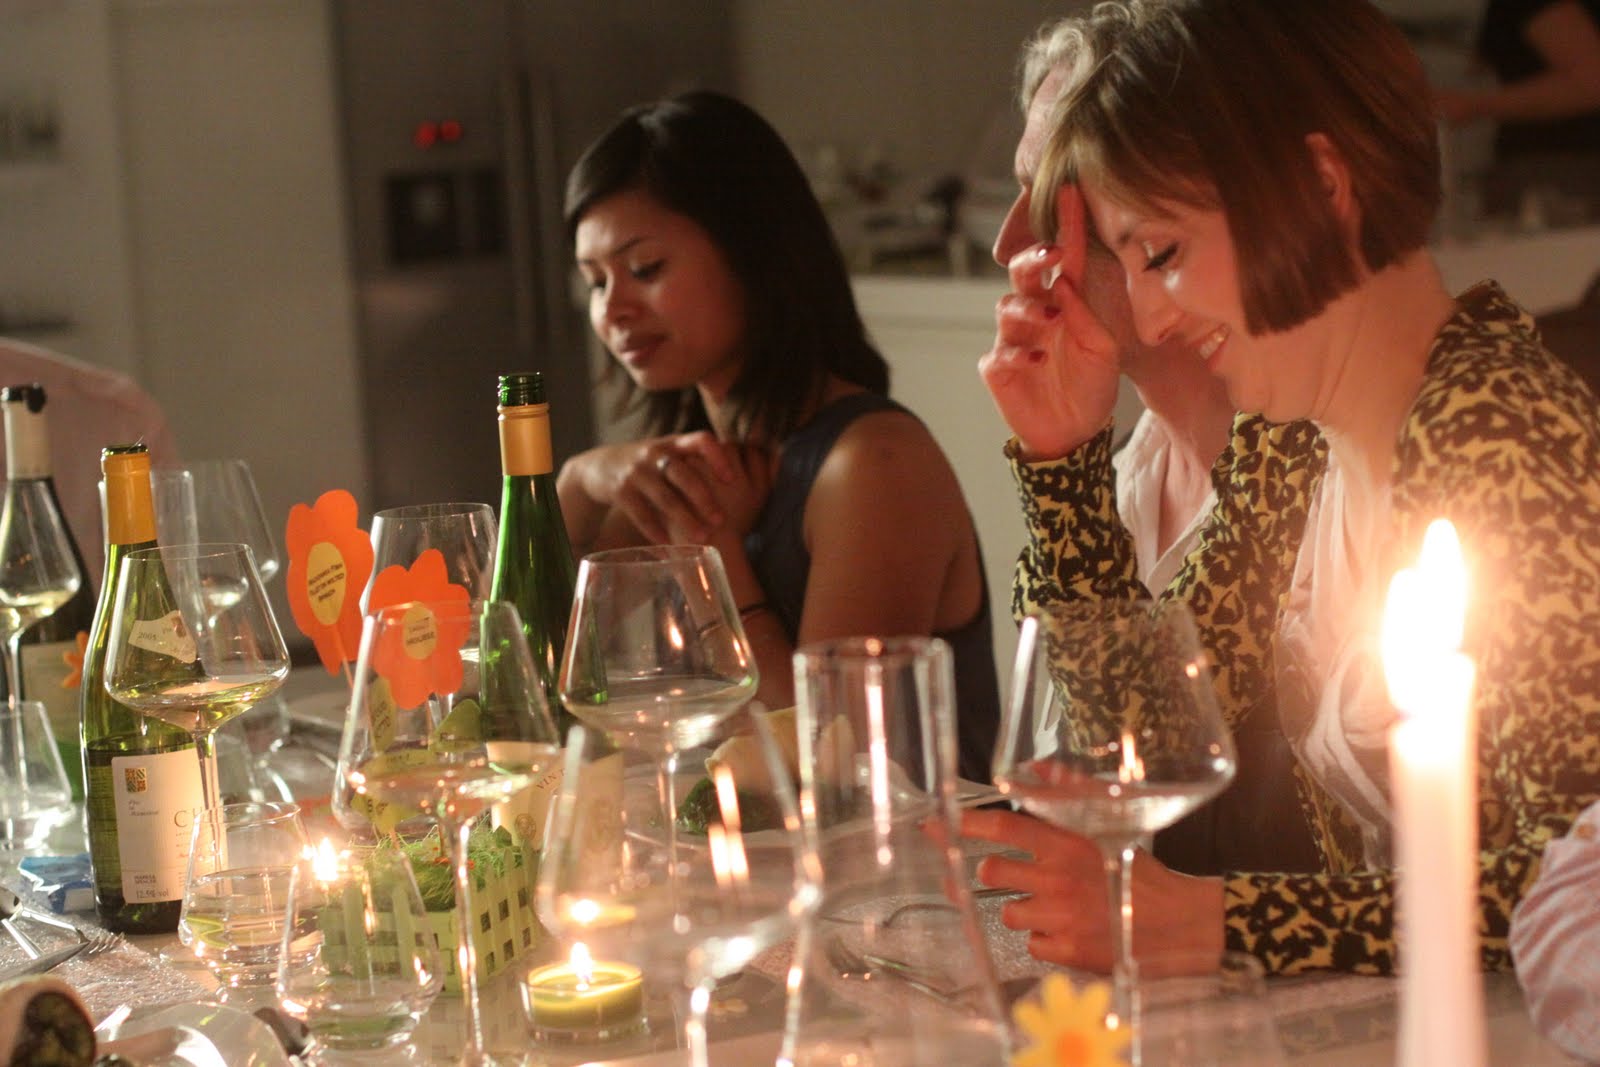 The London Foodie: London Supper Club - White Room Supper Club